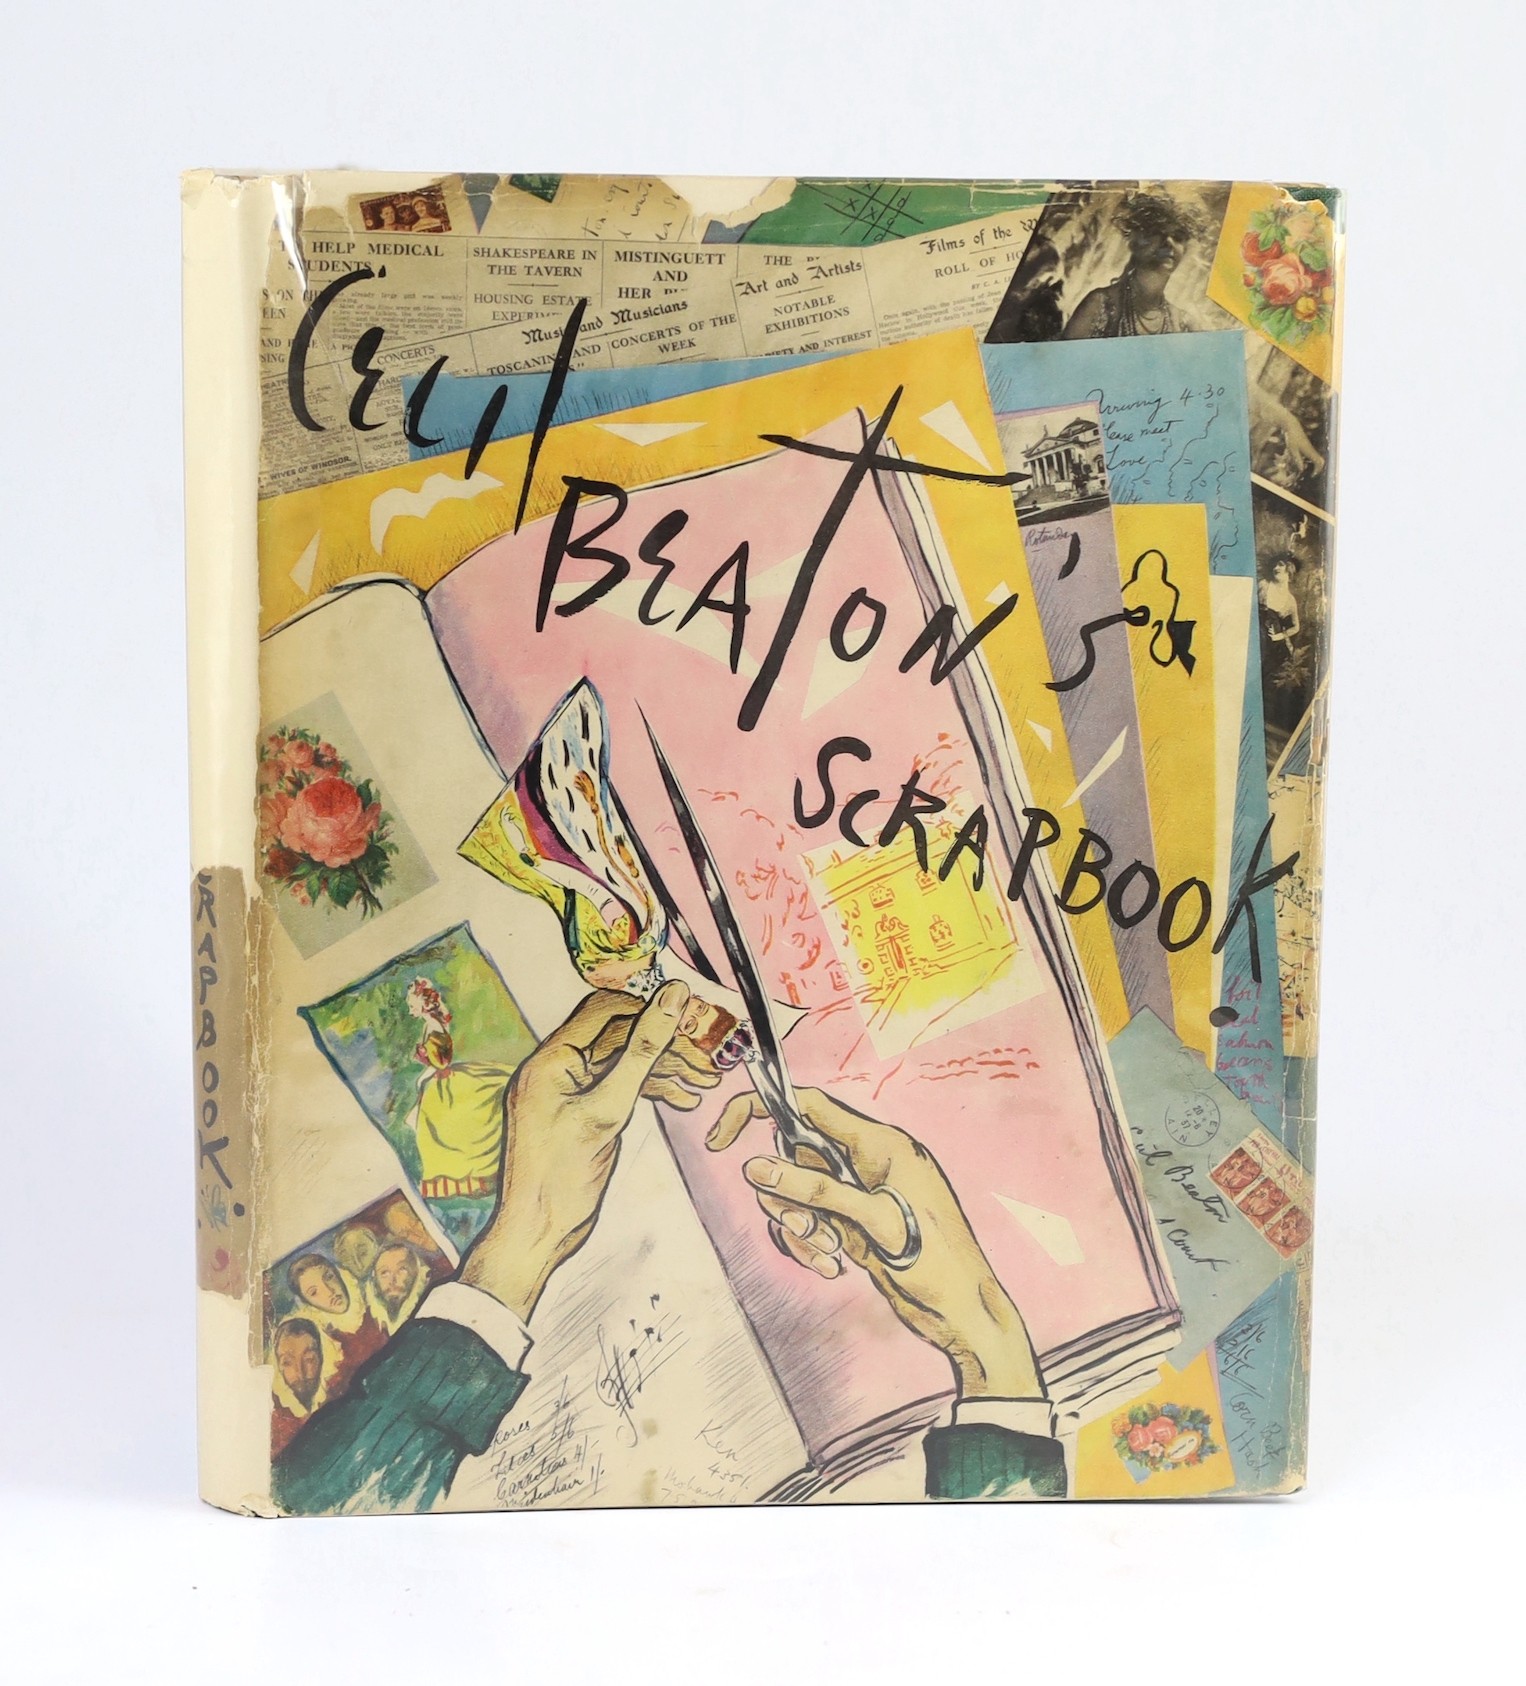 ° ° Beaton, Cecil - Cecil Beaton's Scrapbook. First Edition - inscribed by author to the 'high'